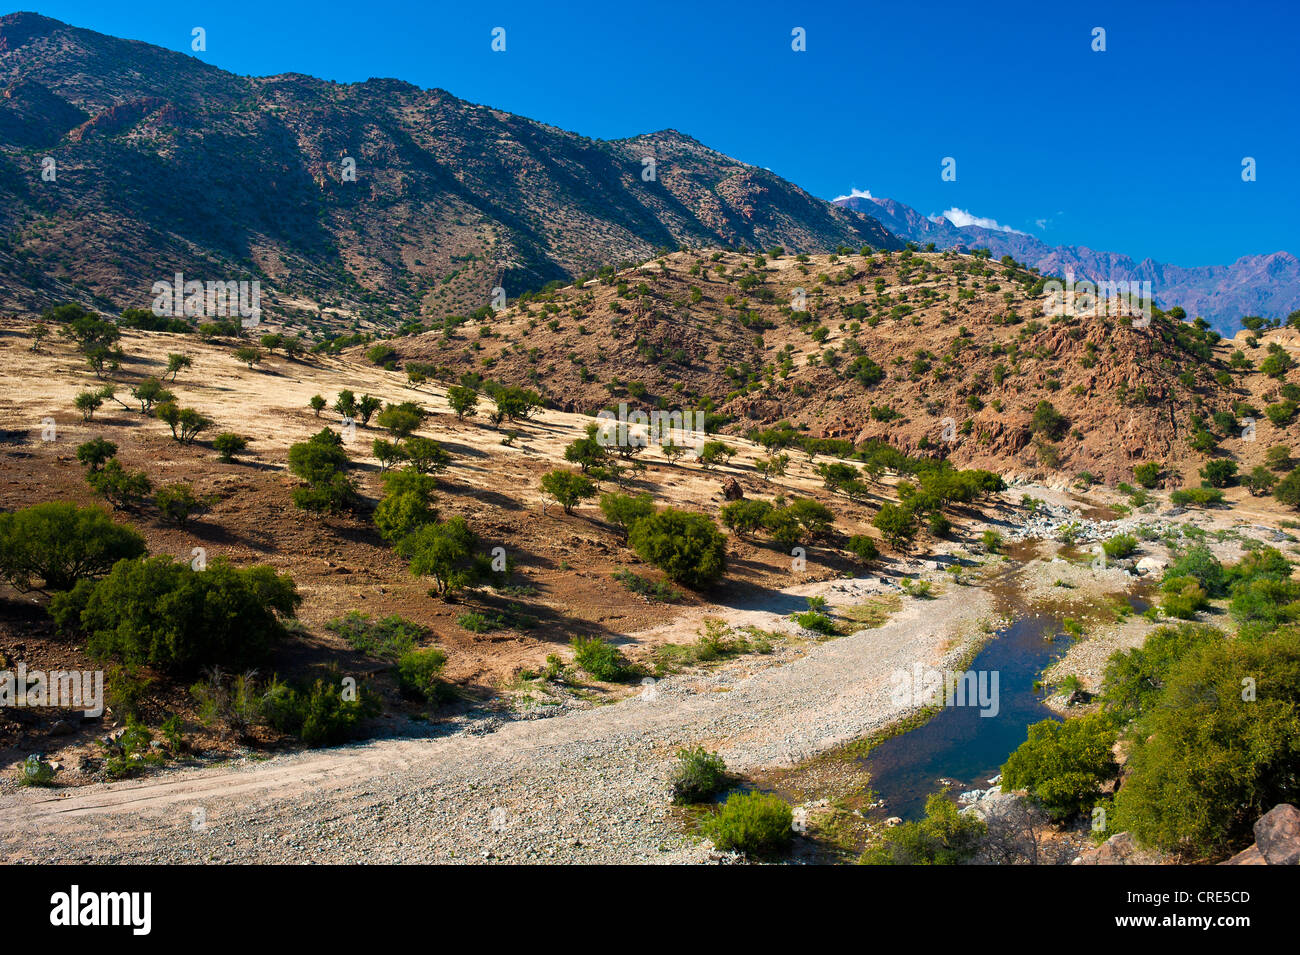 Typical mountain landscape with a river bed and Argan Trees (Argania spinosa), Anti-Atlas Mountains, Valley of the Ammeln Stock Photo